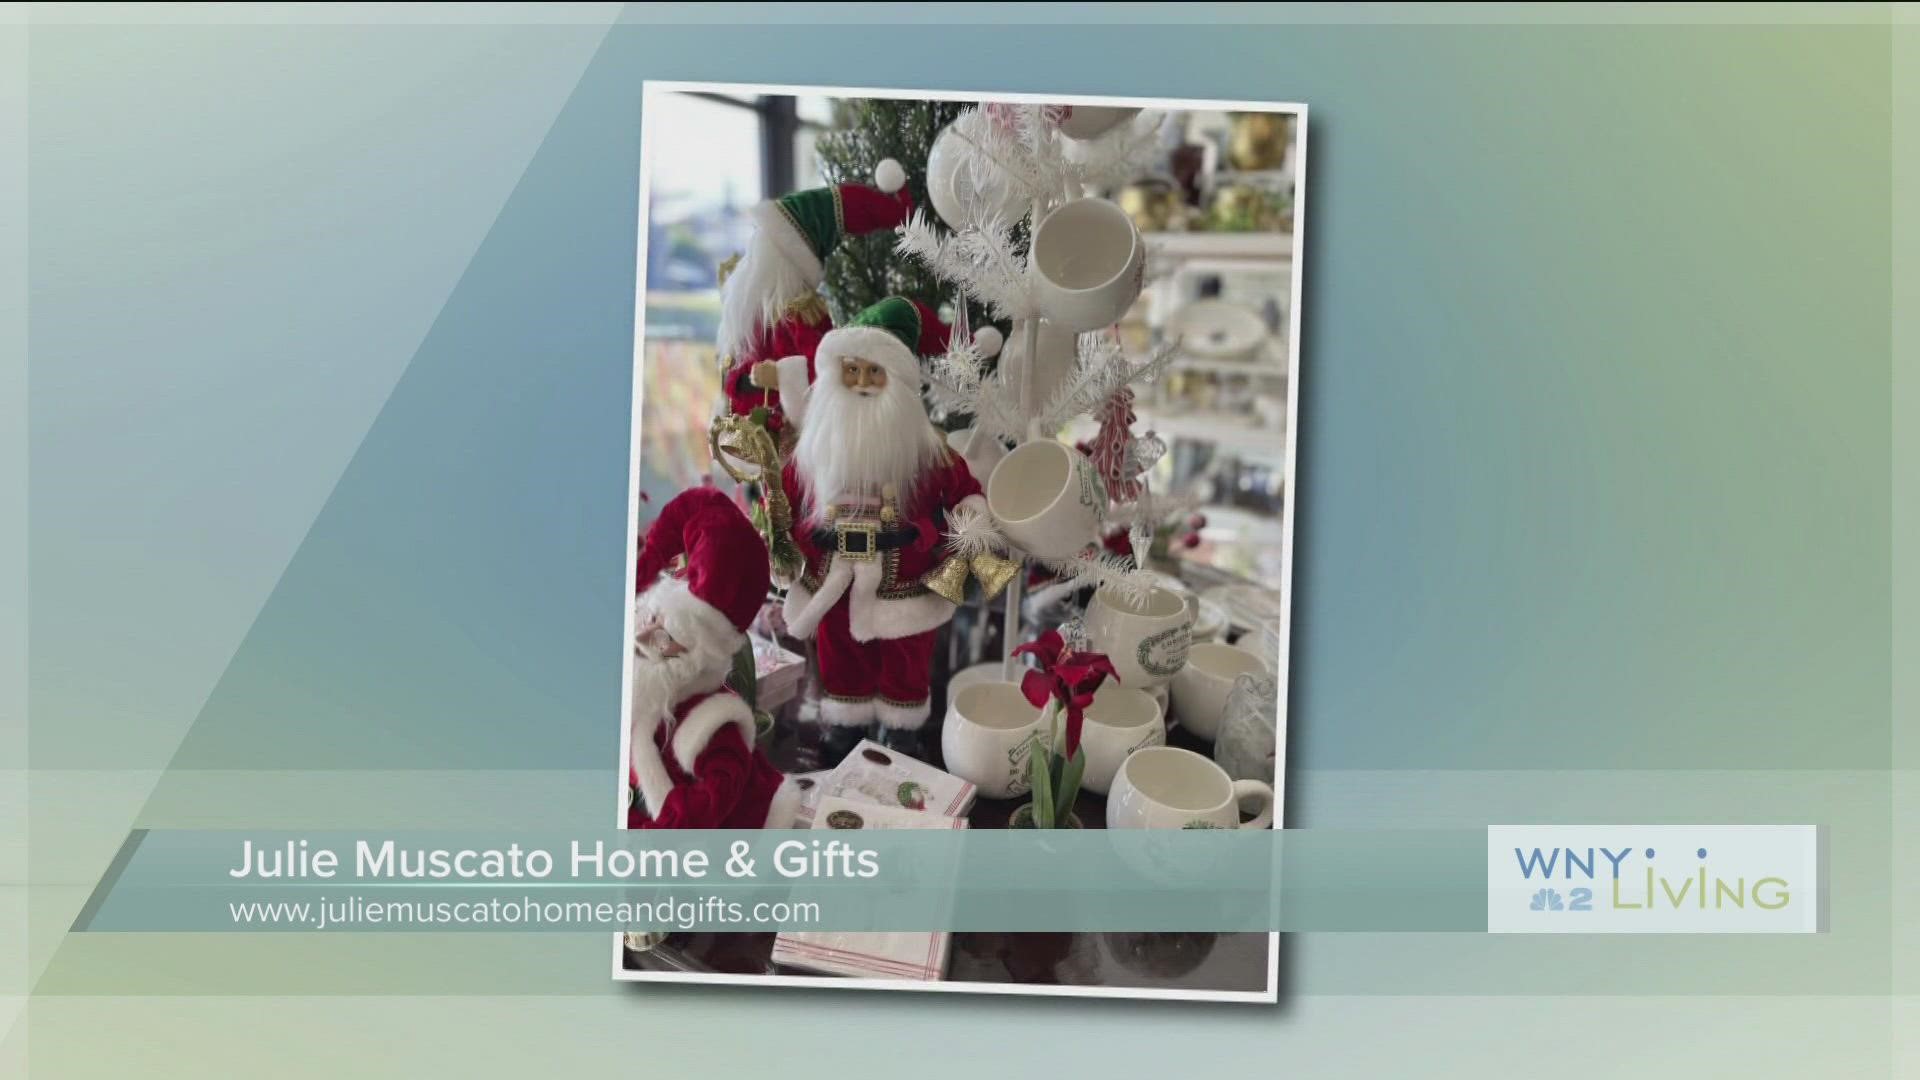 WNY Living - November 26 - Julie Muscato Home & Gifts (THIS VIDEO IS SPONSORED BY JULIE MUSCATO HOME & GIFTS)